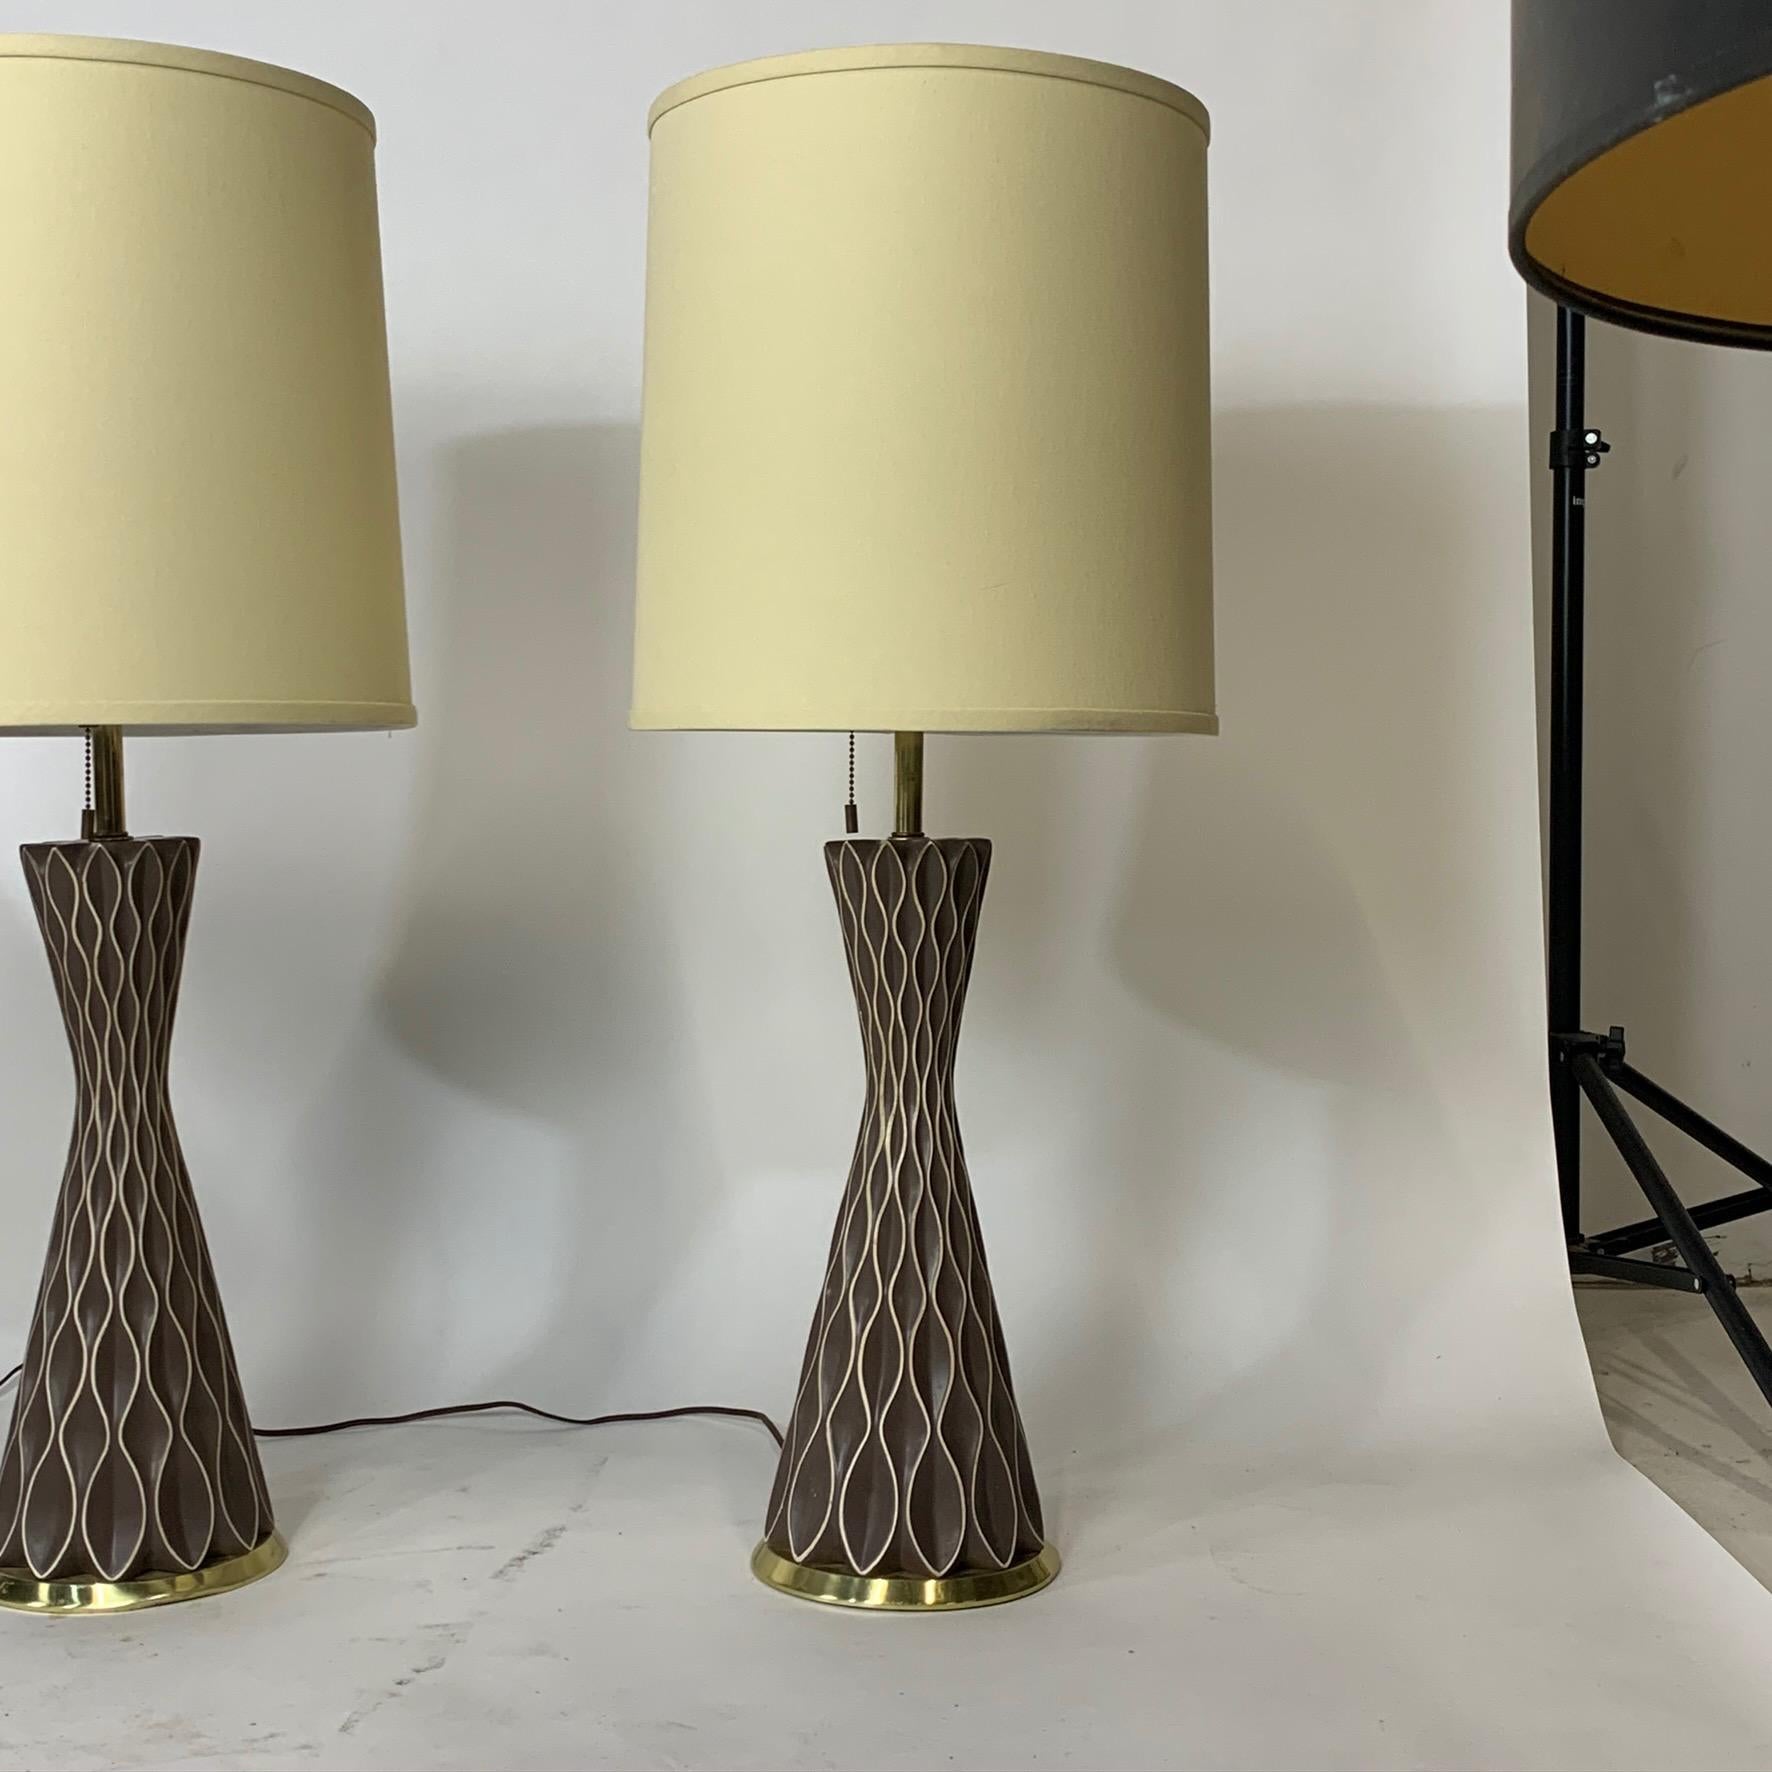 Very fine original hardware on these wonderfully delightful ceramic honeycomb lamps. Each lamp accommodates 3 bulbs. Pull switch alternates between one bulb on, two bulbs on, and three bulbs on- essentially making each lamp a 3 way light.